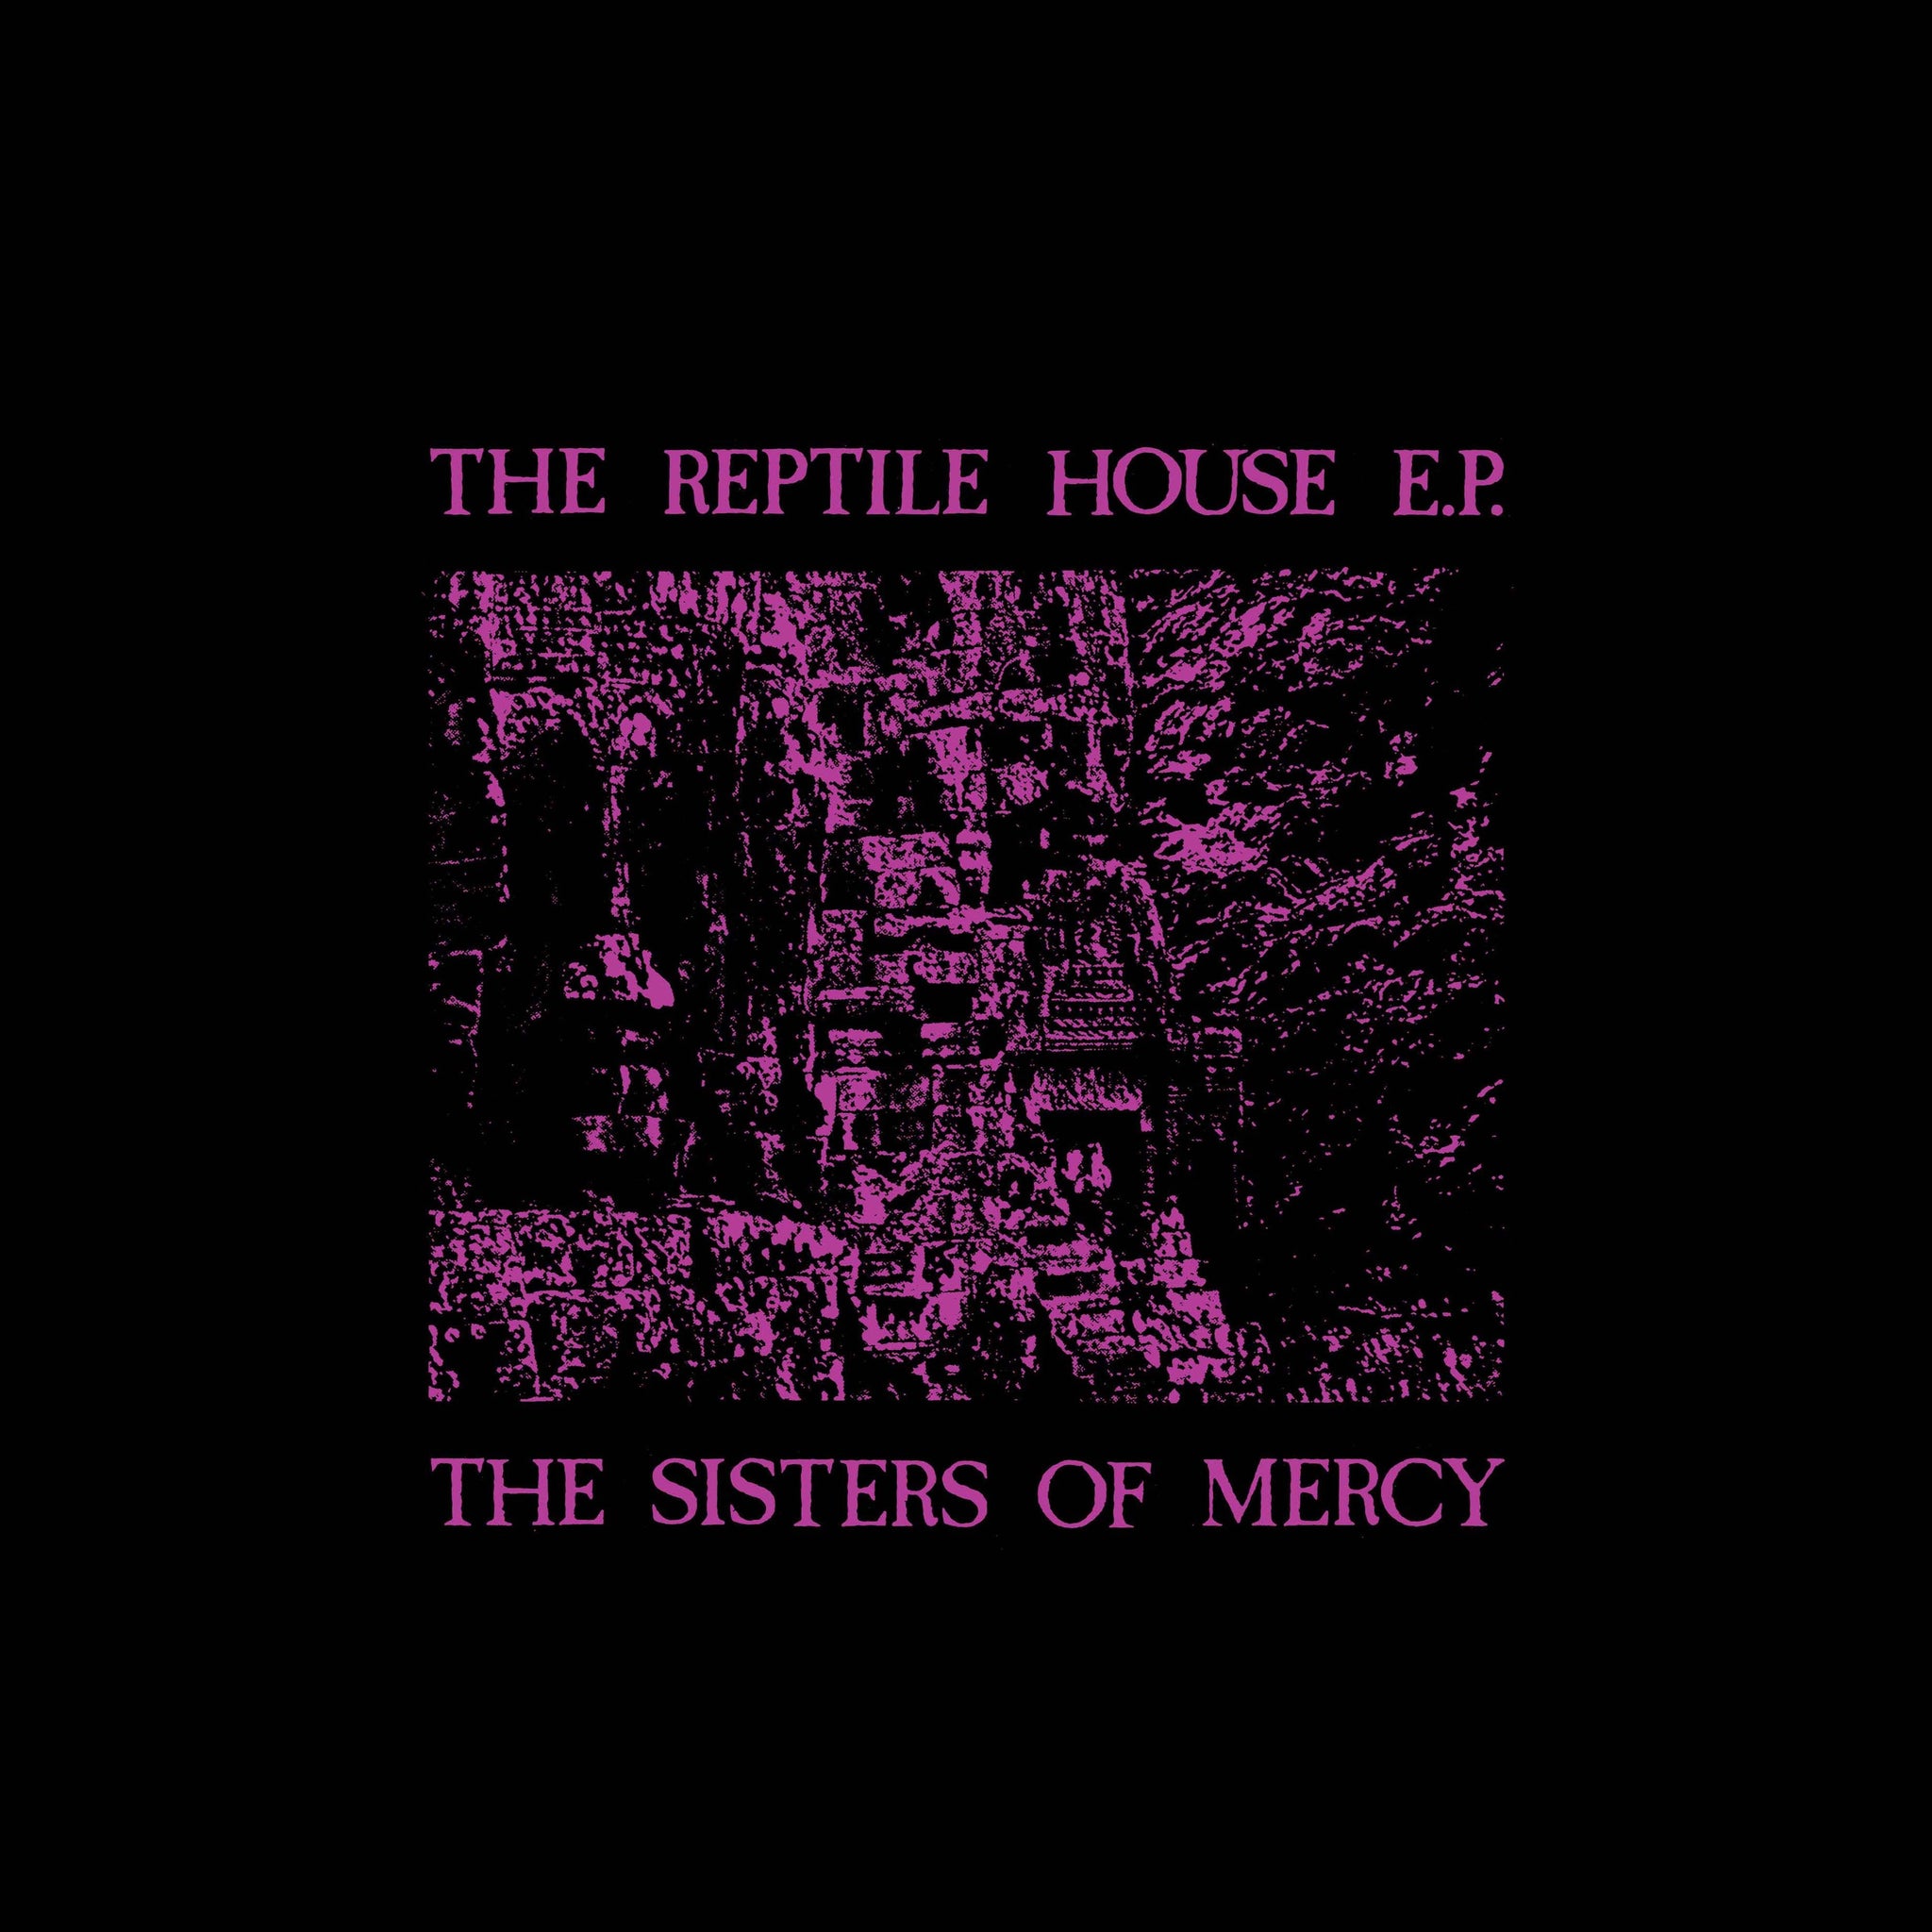 THE SISTERS OF MERCY - The Reptile House EP - LP - Vinyl [RSD23]